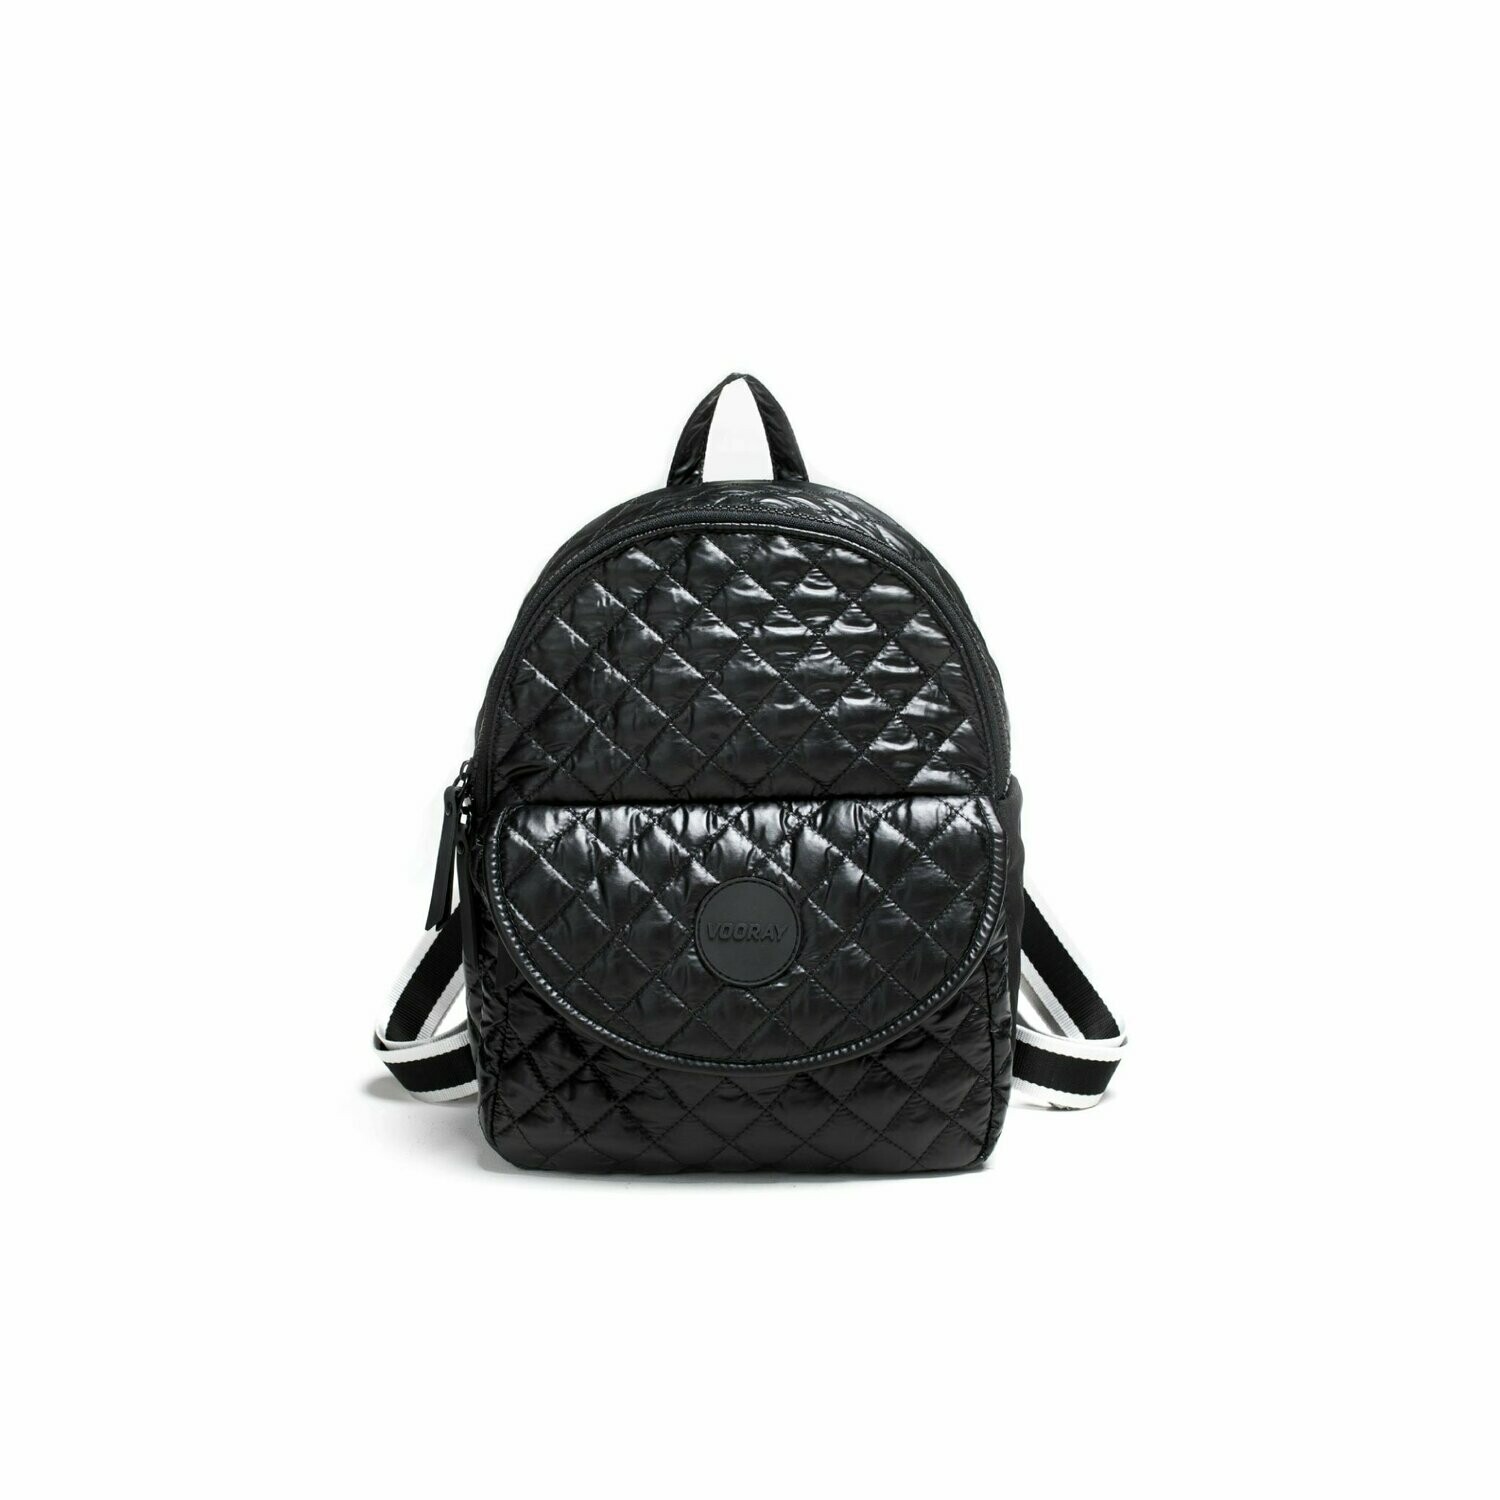 Vooray Lexi Backpack